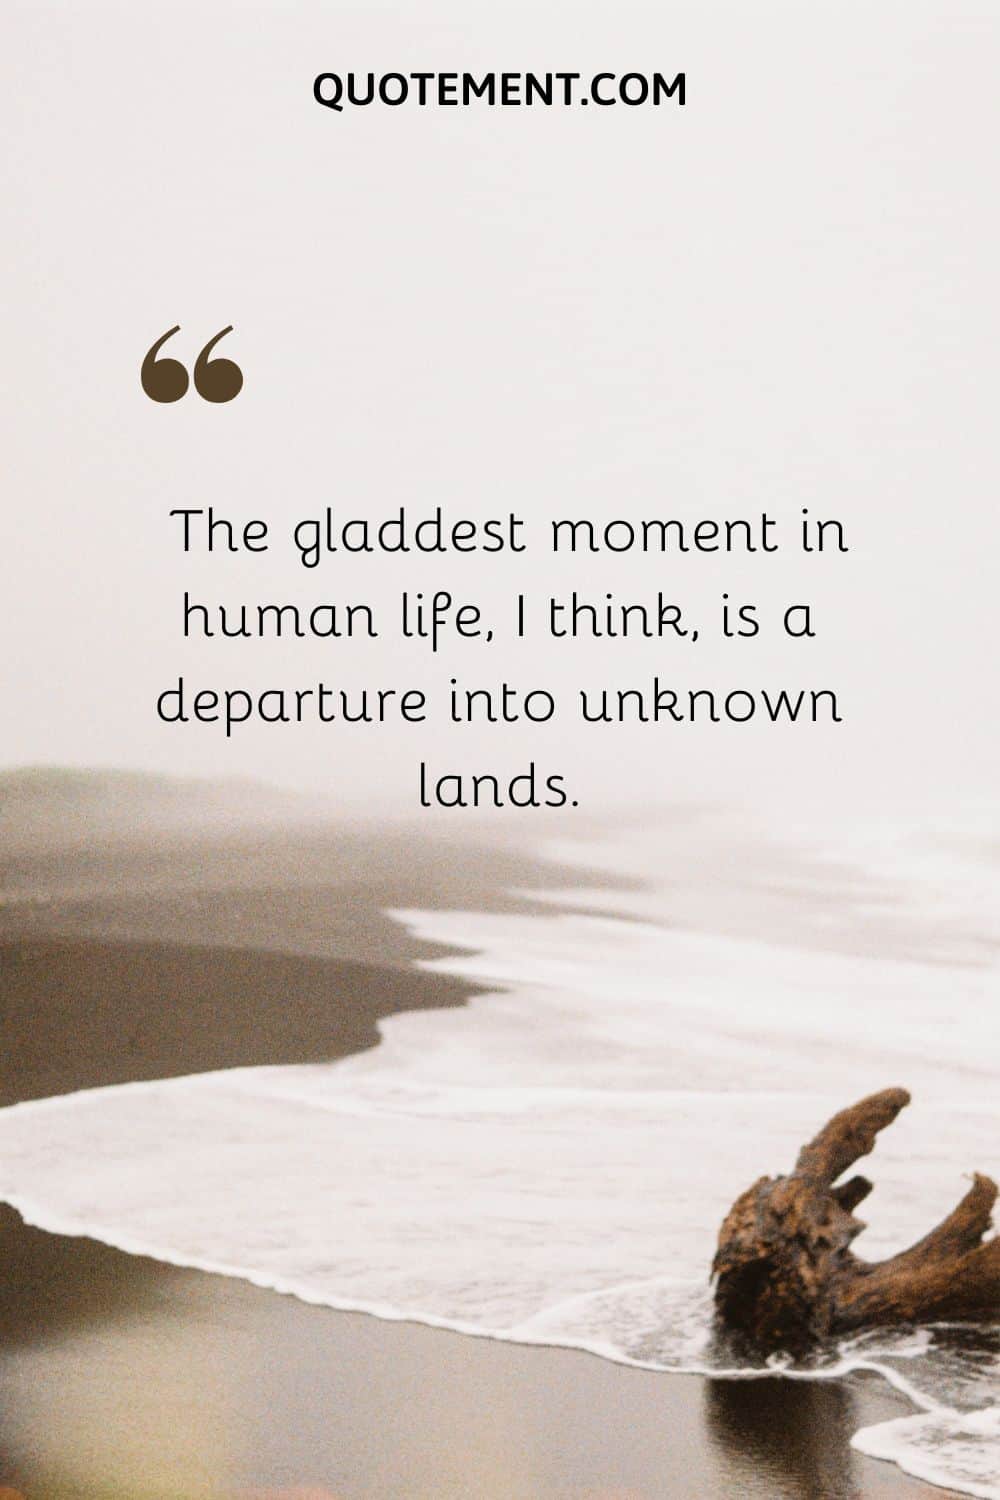 The gladdest moment in human life, I think, is a departure into unknown lands